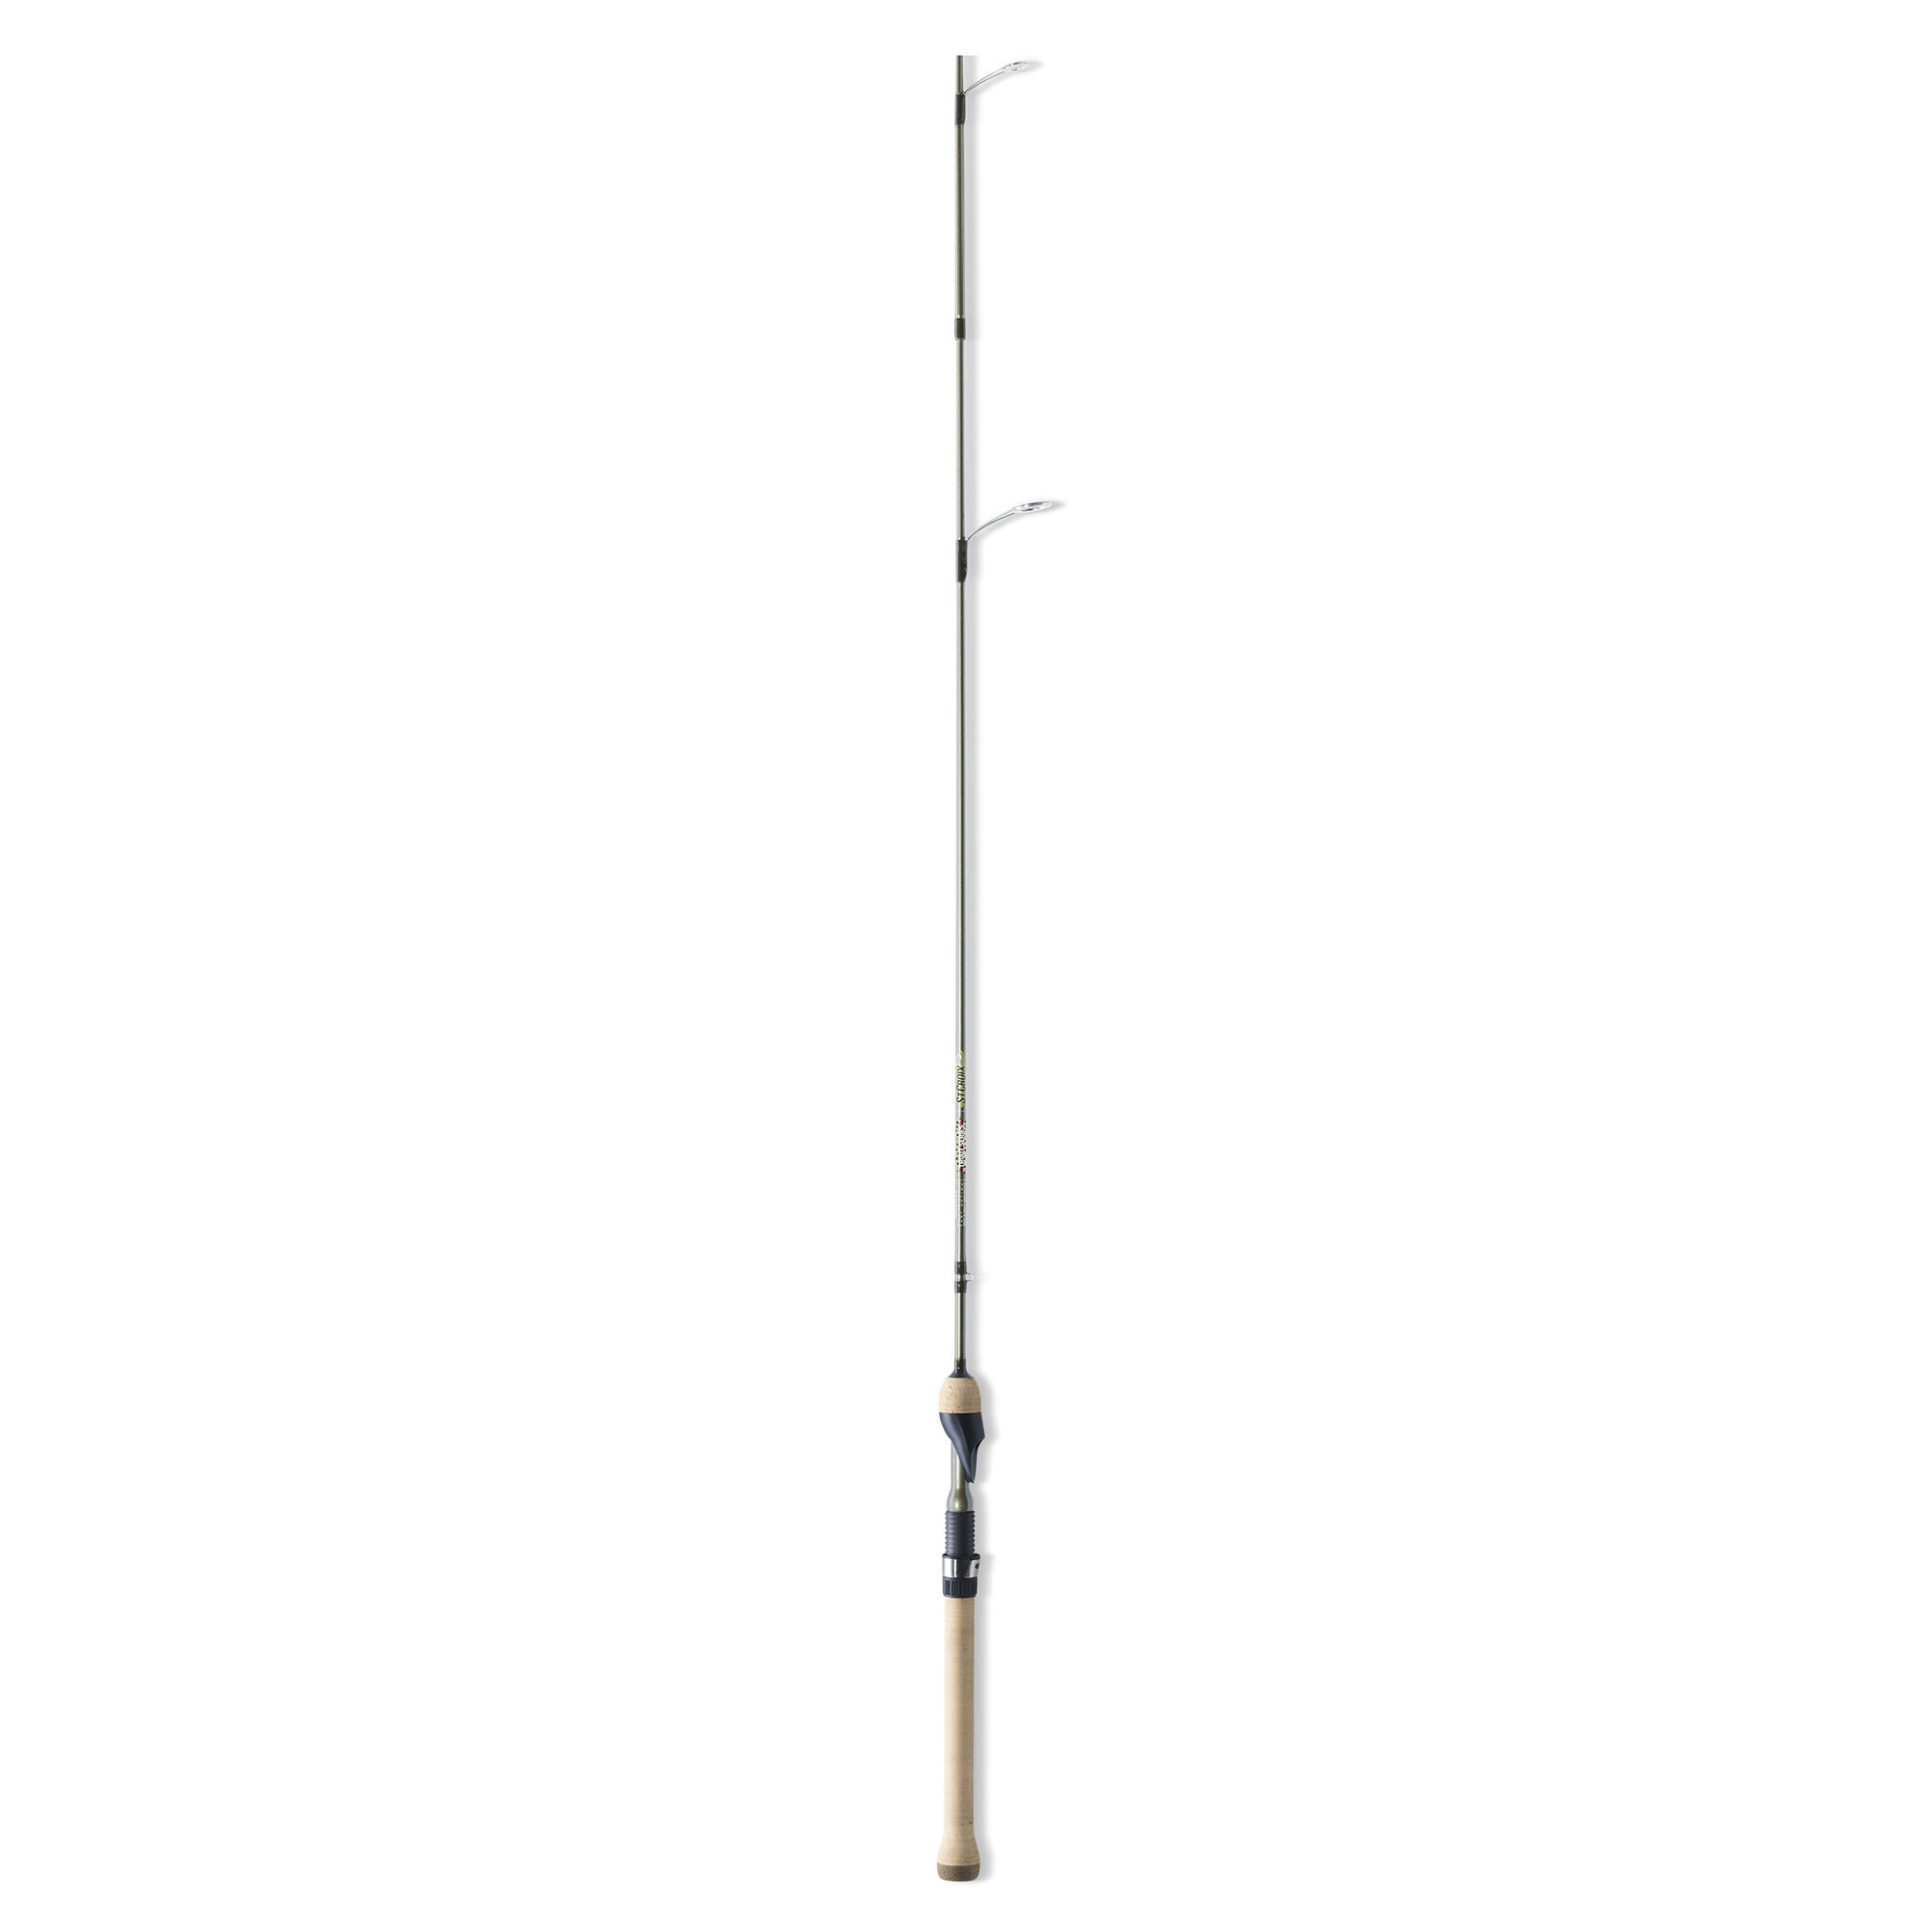 St Croix Trout Series TSS70LXF2 Spinning Rod for sale online 